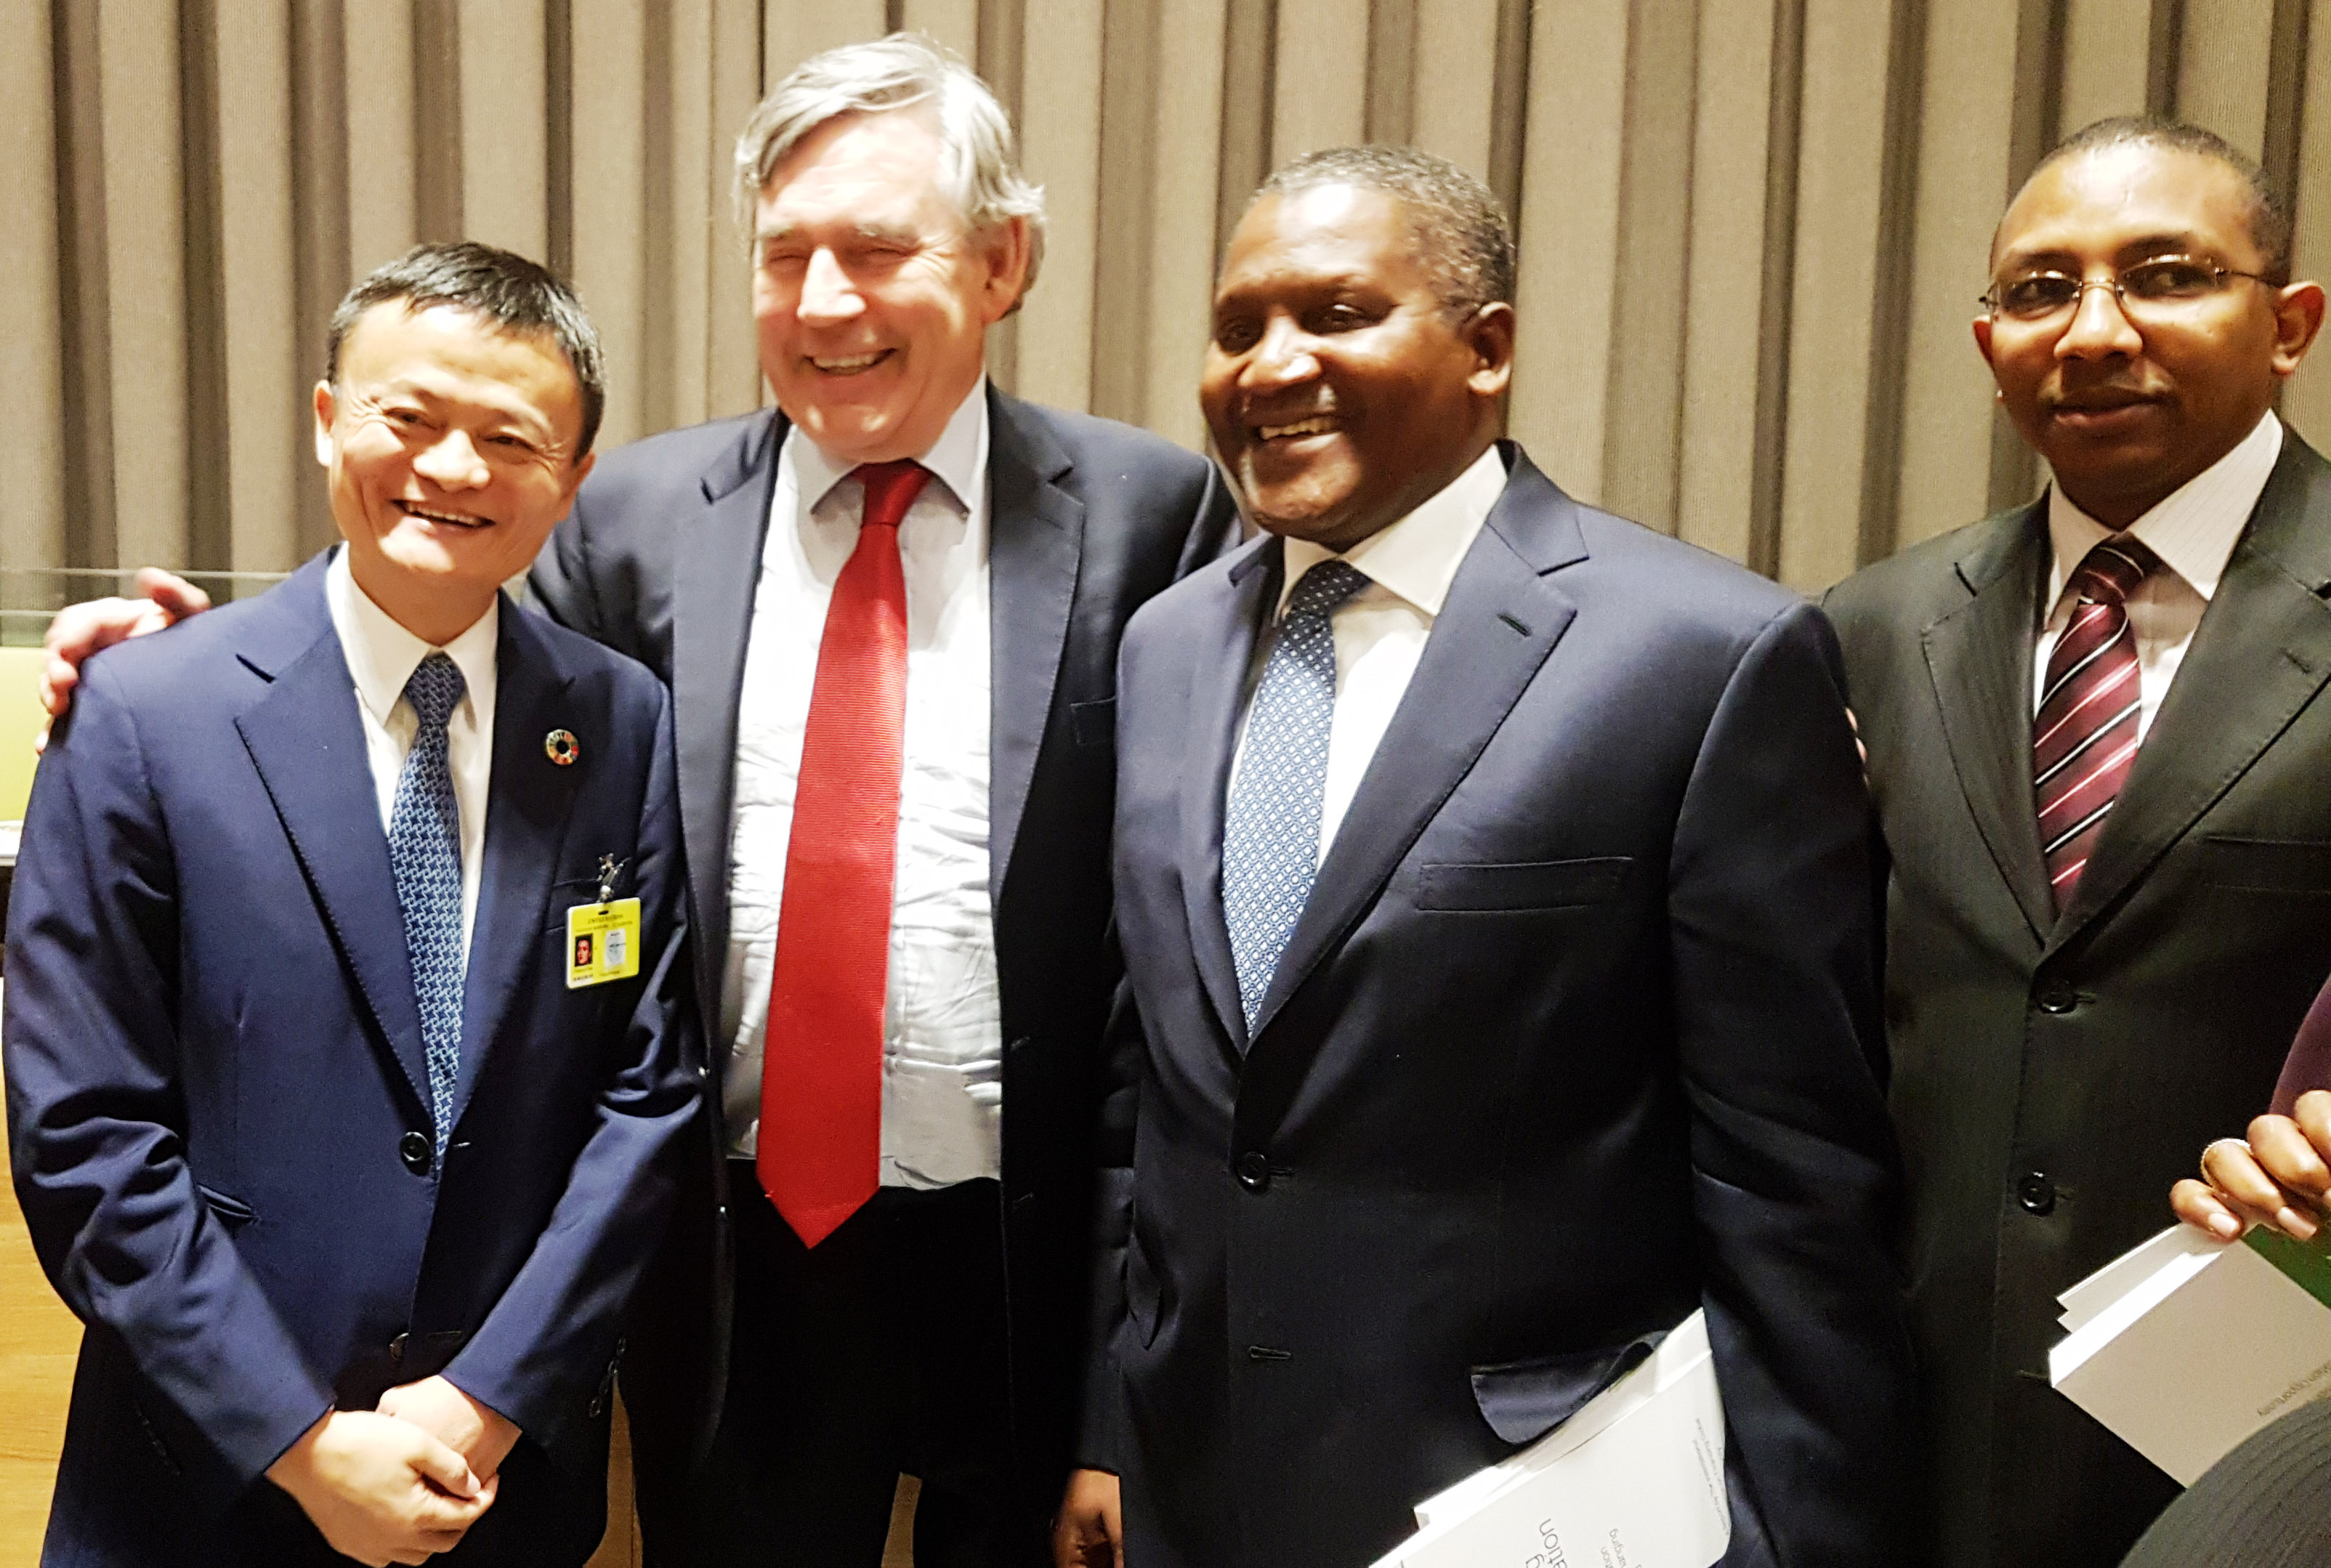 L-R: Jack Ma, Founder & Executive Chairman of Ali baba Group; Gordon Brown, former British Prime Minister and UN Special Envoy for Global Education; Aliko Dangote, President/CE, Dangote Group and Dr. Abdu Mukthar, Group Chief Strategy Officer at United Nations Education Commission launch of 'The Learning Generation' presented to the UN Secretary General Ban Kim Moon at the UN Headquarters in New York